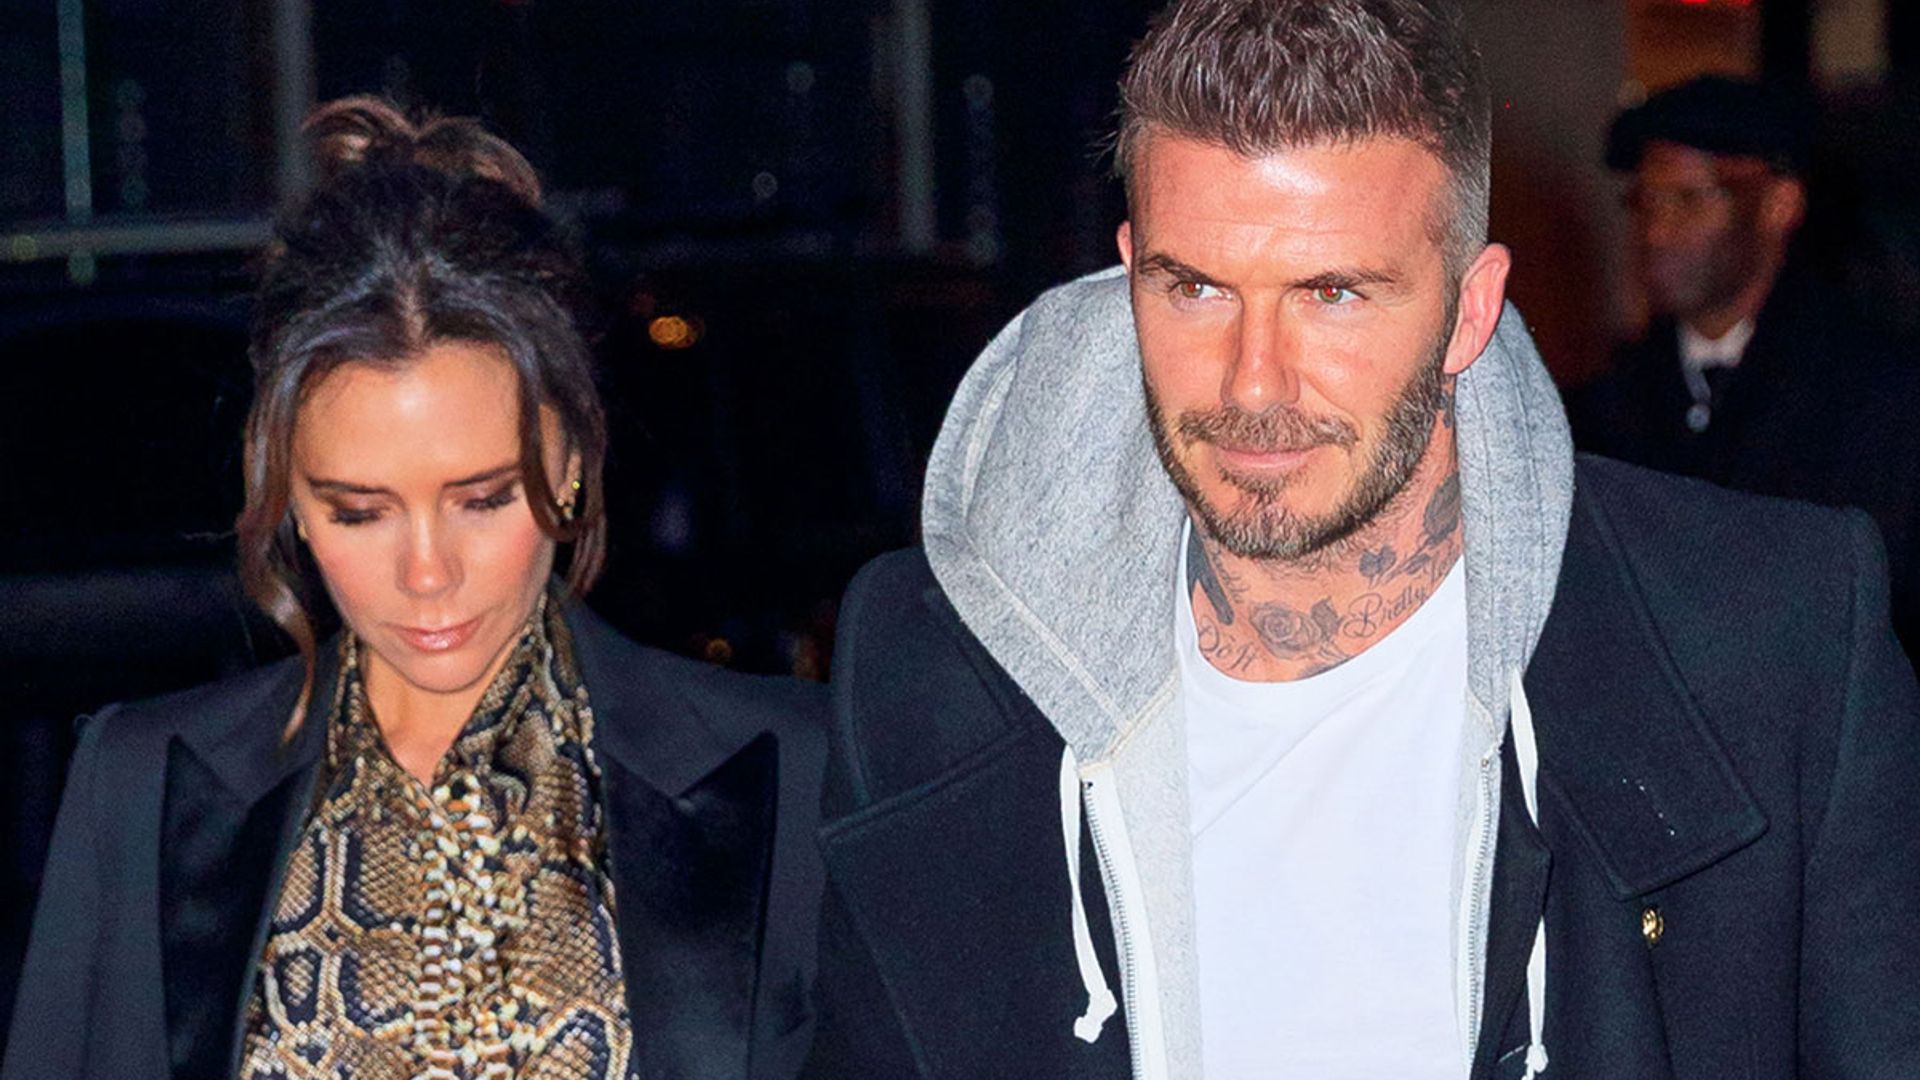 Victoria Beckham flashes smile while making rare PDA with David | HELLO!